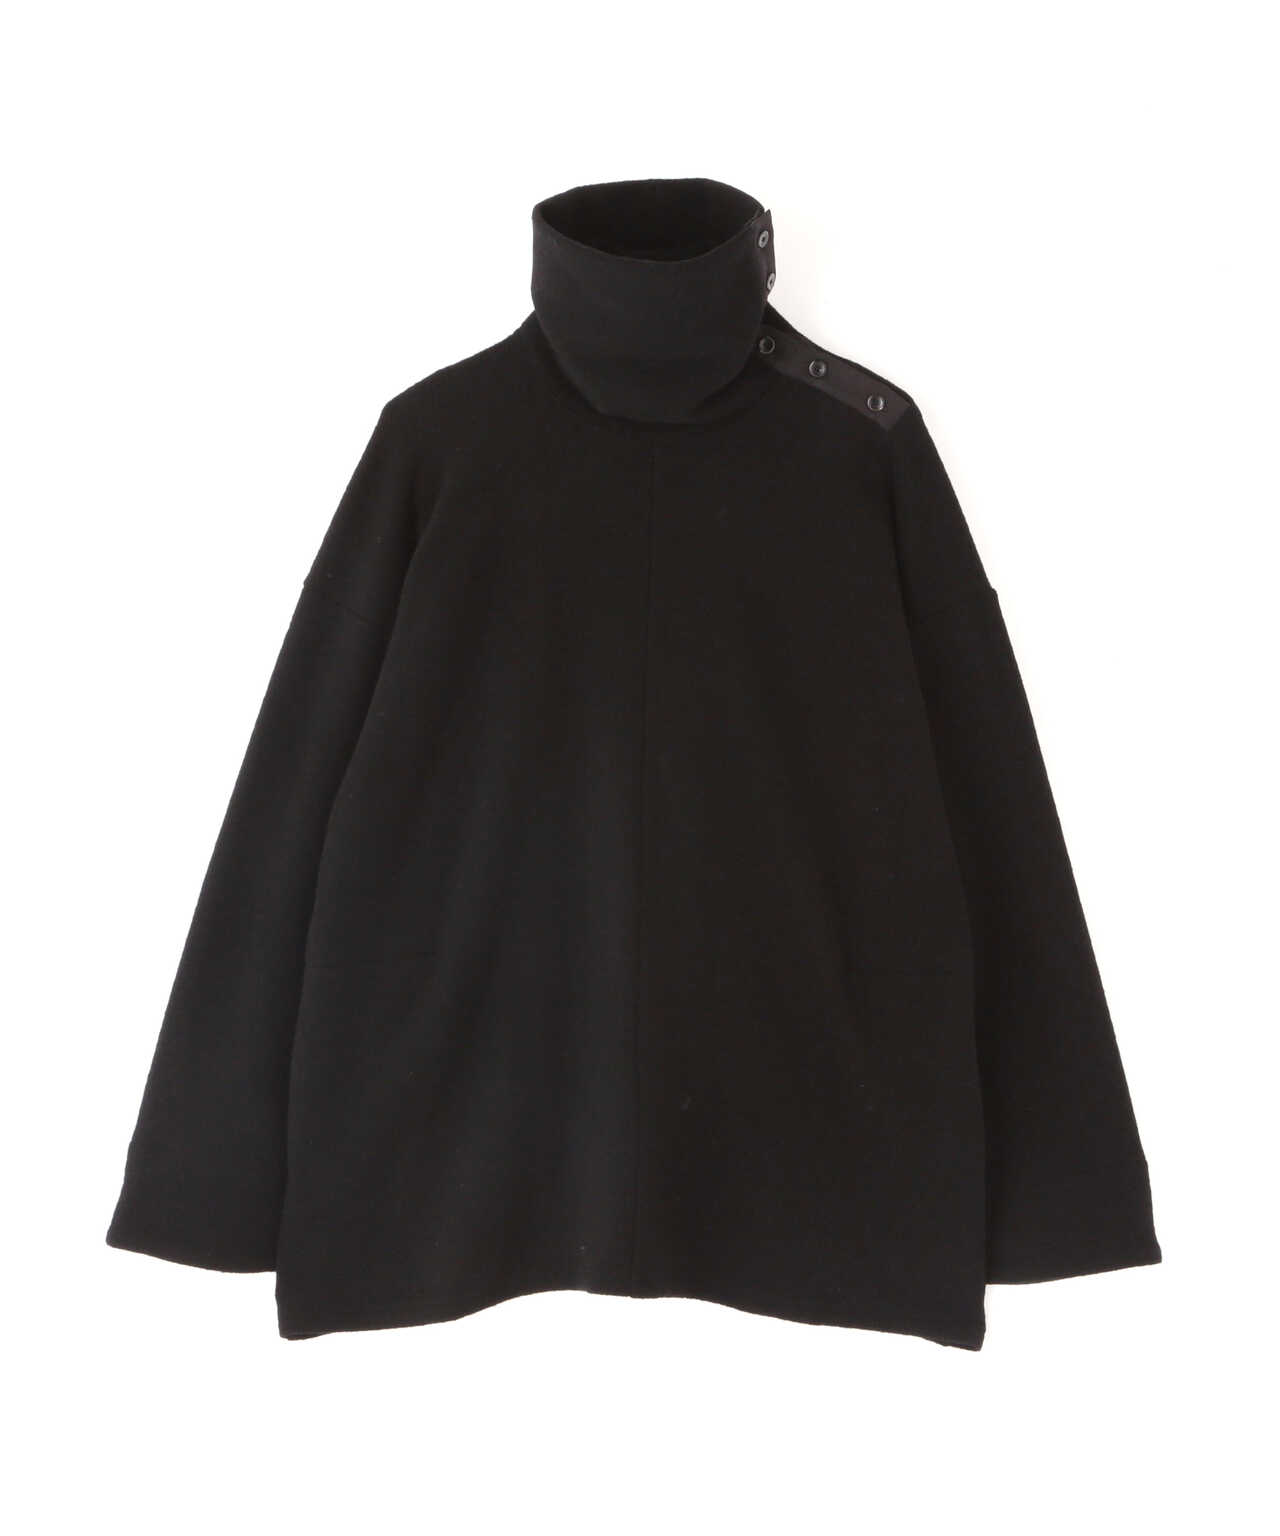 th products Turtle Neck Knit着用回数10回ほど